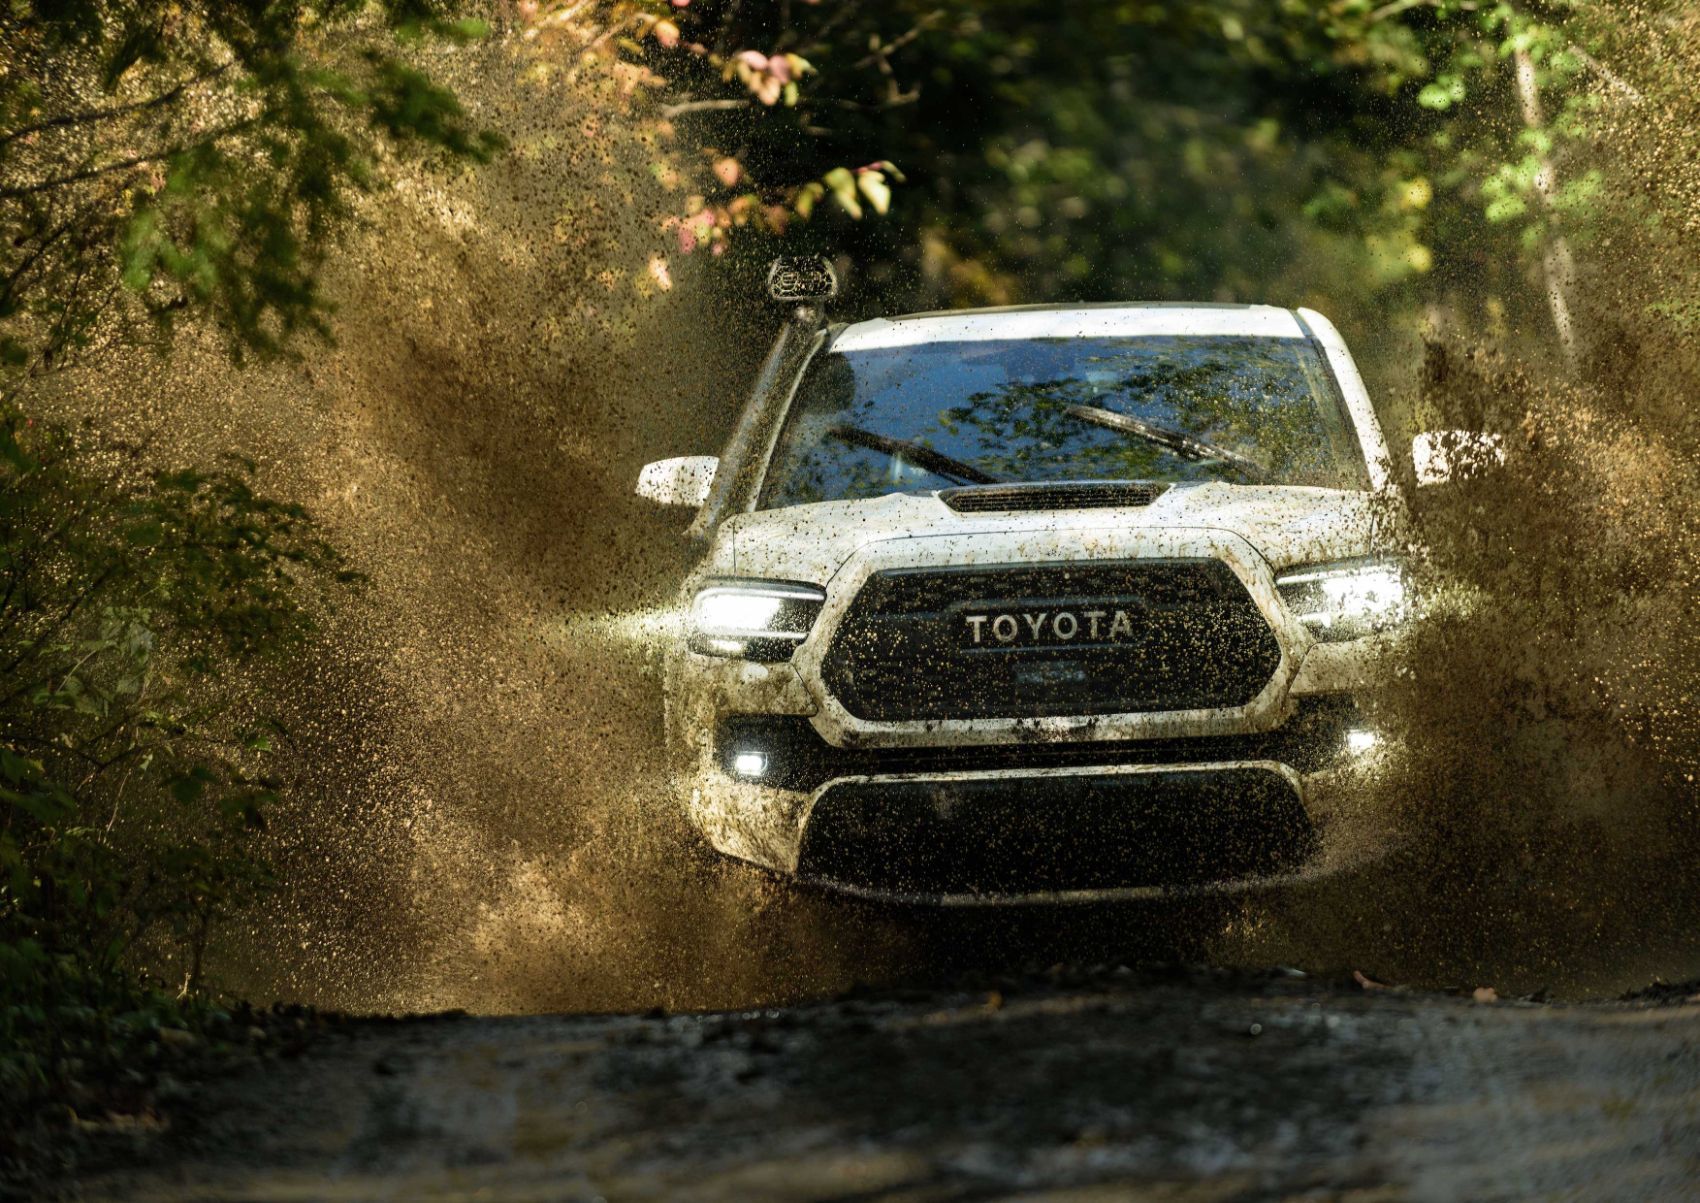 2020 Toyota Tacoma Trd Pro Review Bring On The Sand Mud